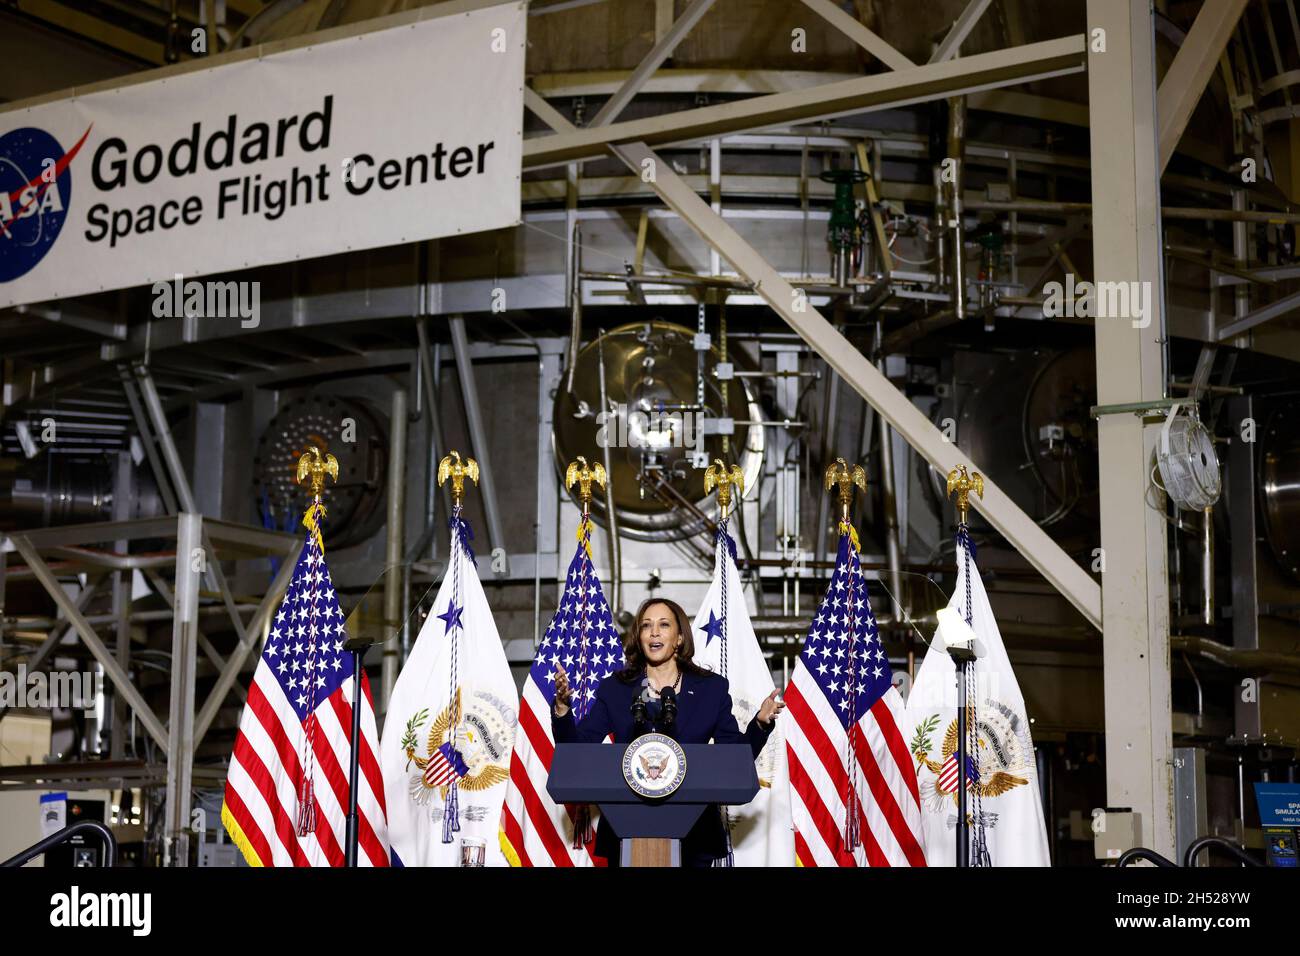 Greenbelt, USA. 05th Nov, 2021. U.S. Vice President Kamala Harris speaks at the National Aeronautics and Space Administration (NASA) Goddard Space Flight Center in Greenbelt, Maryland on Friday, November 5, 2021. Harris announced the Biden administration's inaugural meeting of the National Space Council will be held on December 1. Photo by Ting Shen/UPI Credit: UPI/Alamy Live News Stock Photo